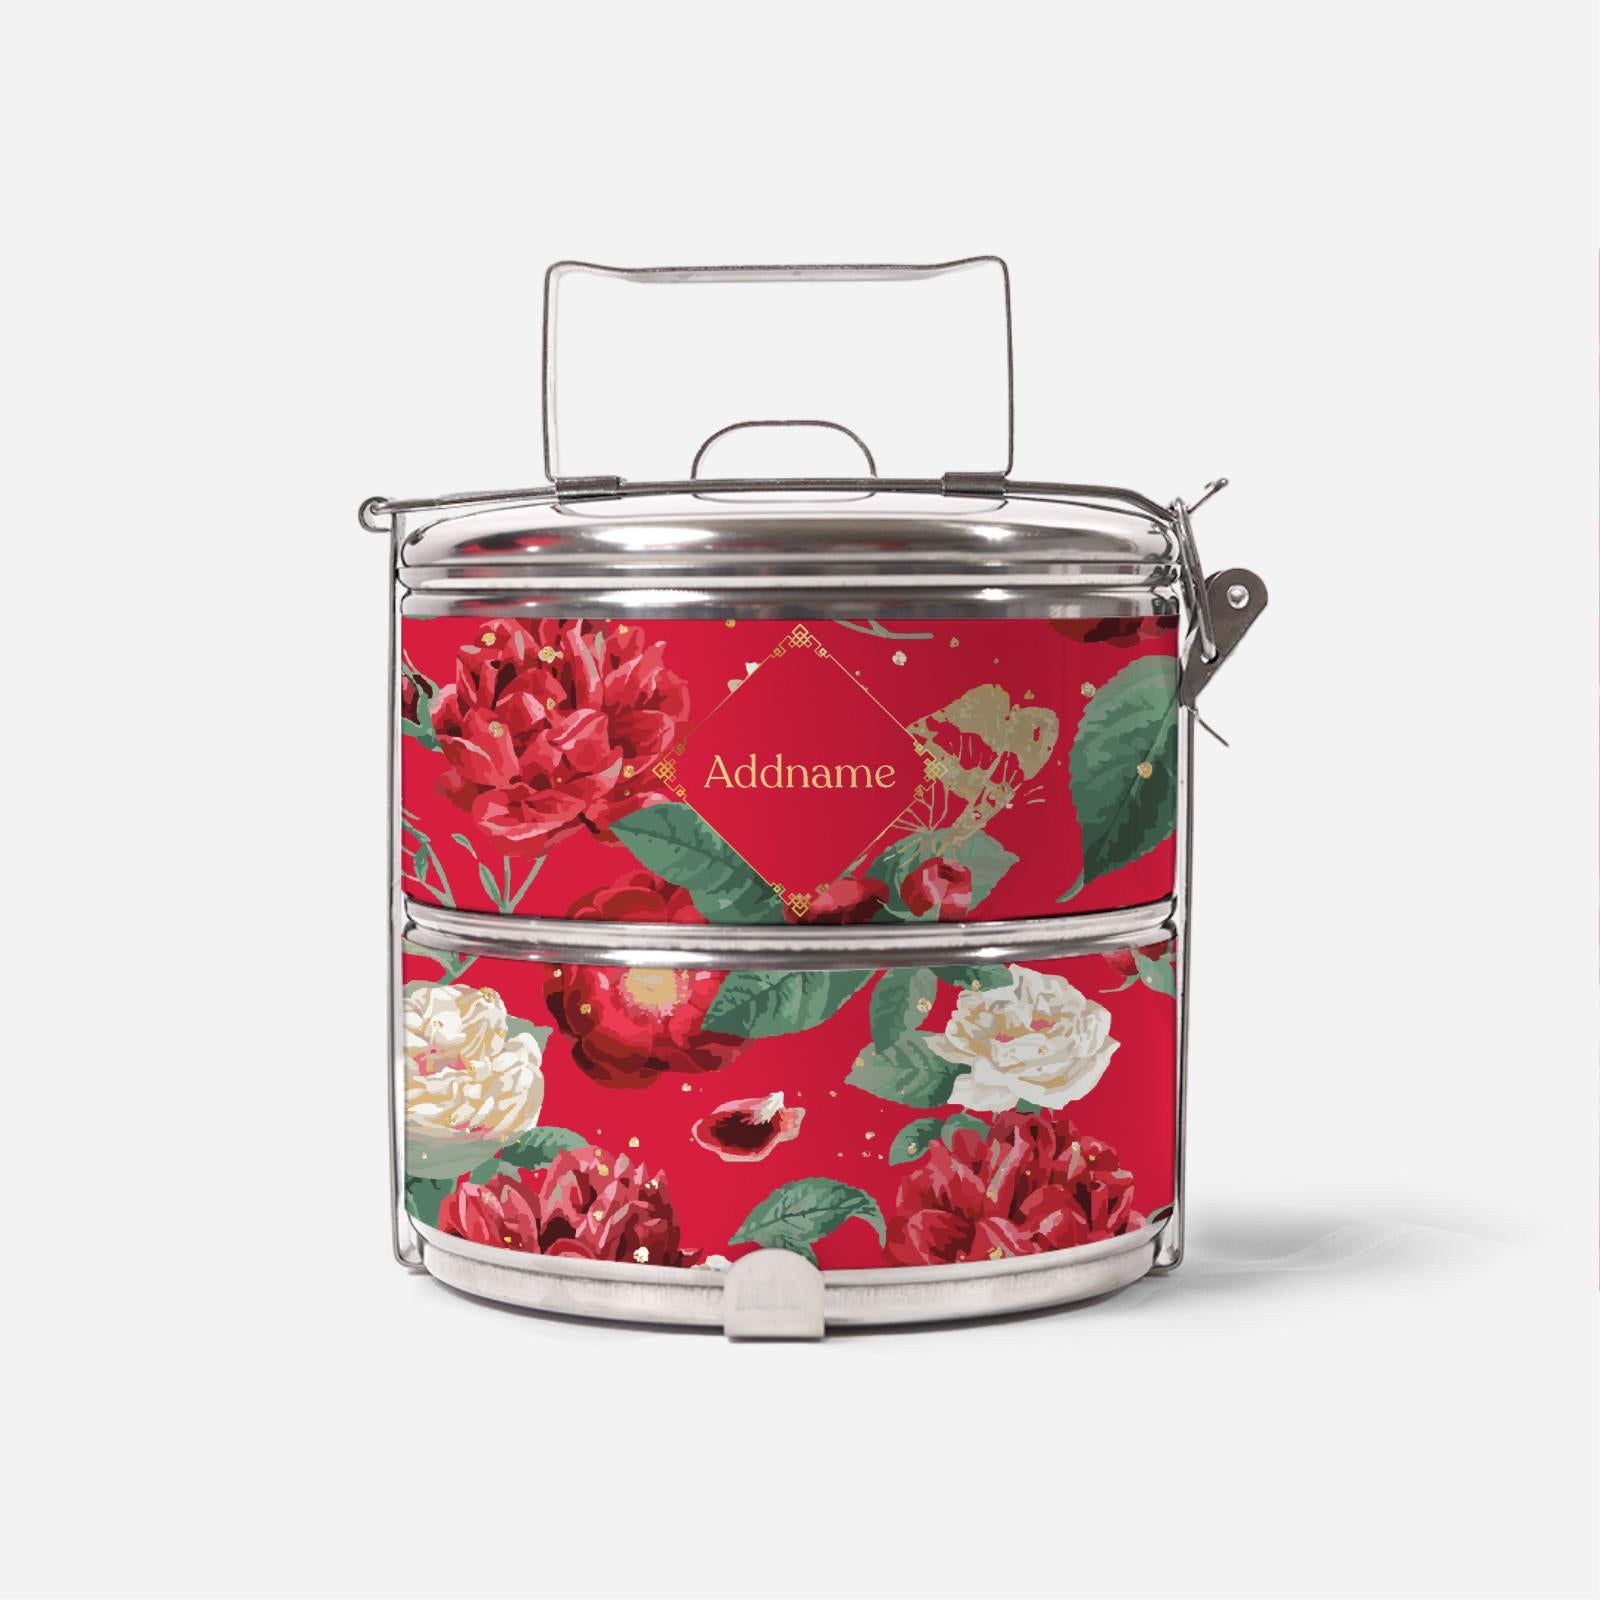 Royal Floral Series With English Personalization Two Tier Standard Tiffin Carrier - Scorching Passion